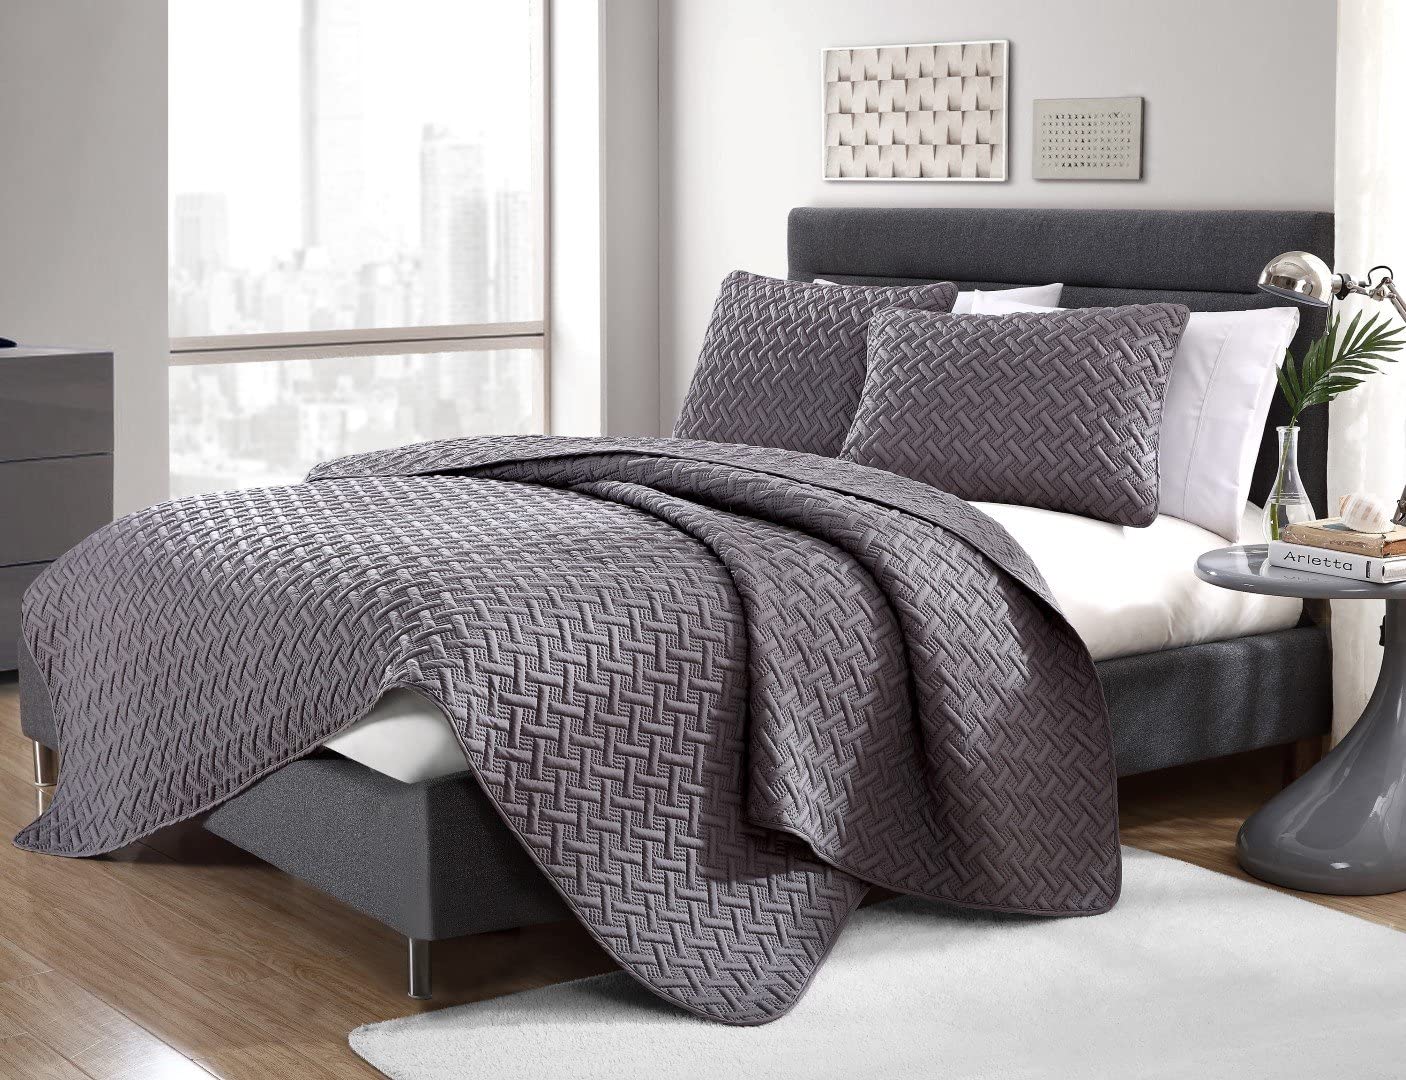 VCNY Home Nina Bedding Collection Luxury Premium Ultra Soft Quilt Coverlet, Comfortable 3 Piece Set, Modern Geometric Design For Home Hotel Decor, King, Grey